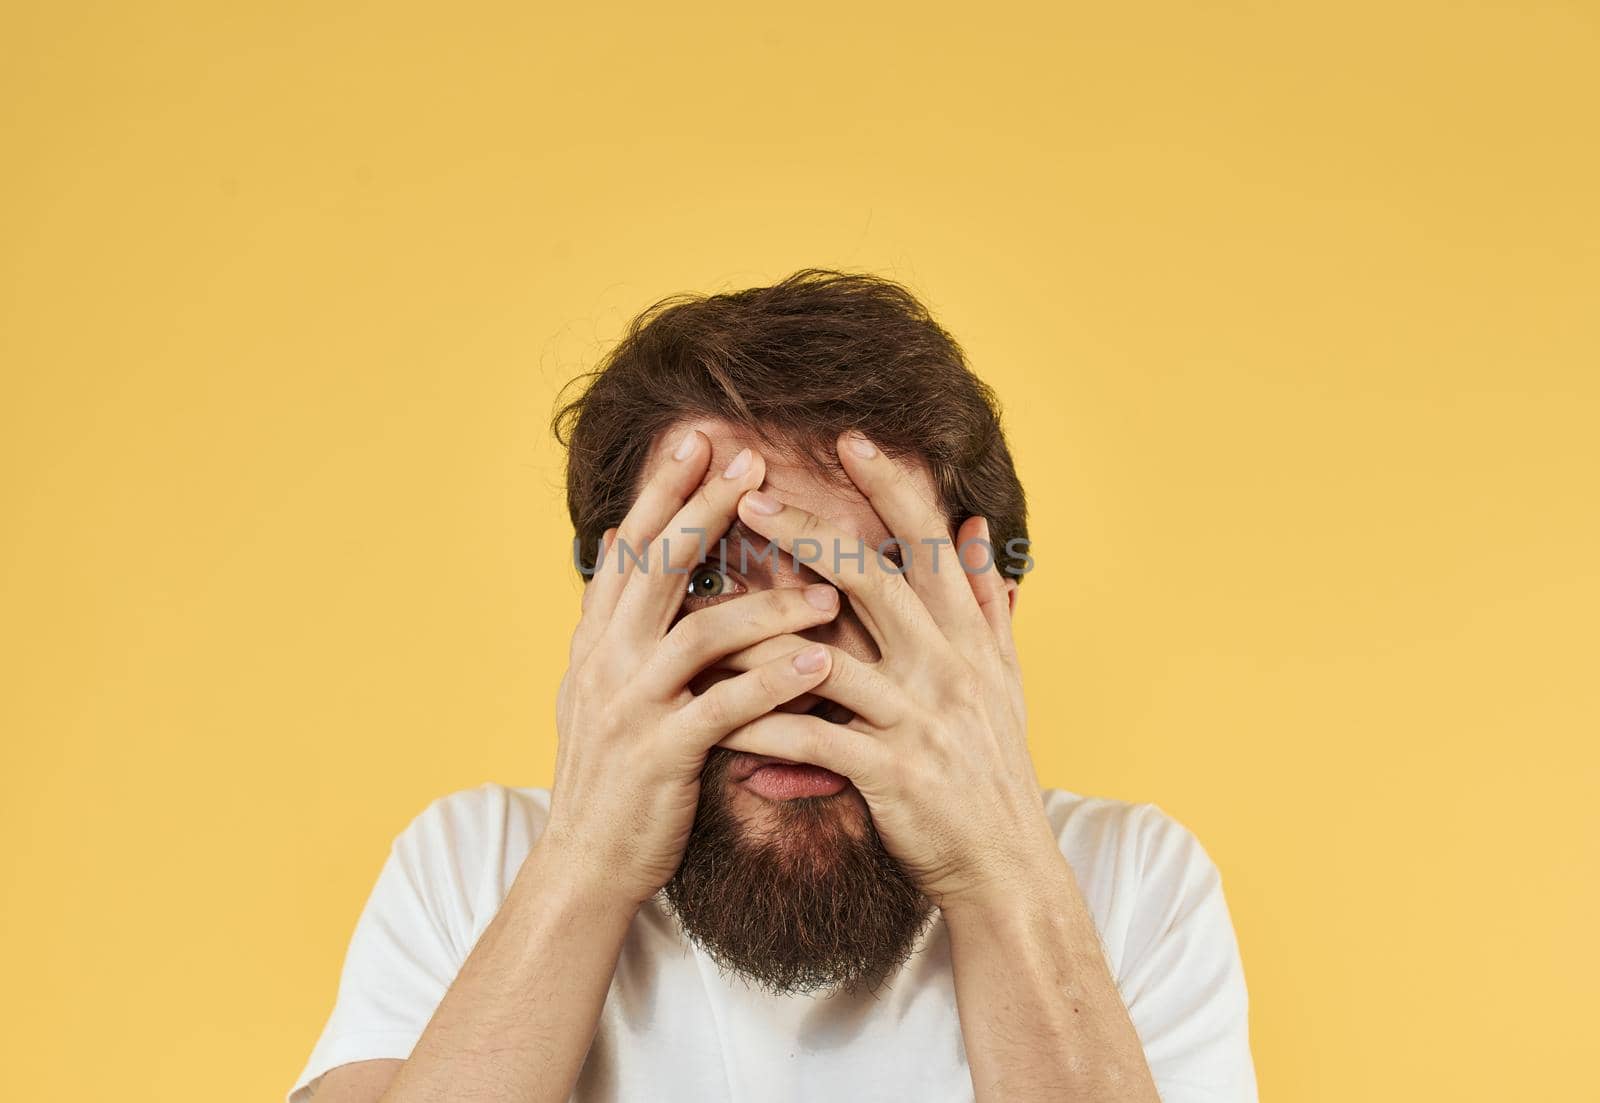 Upset man holds his hands near his face on a yellow background by SHOTPRIME